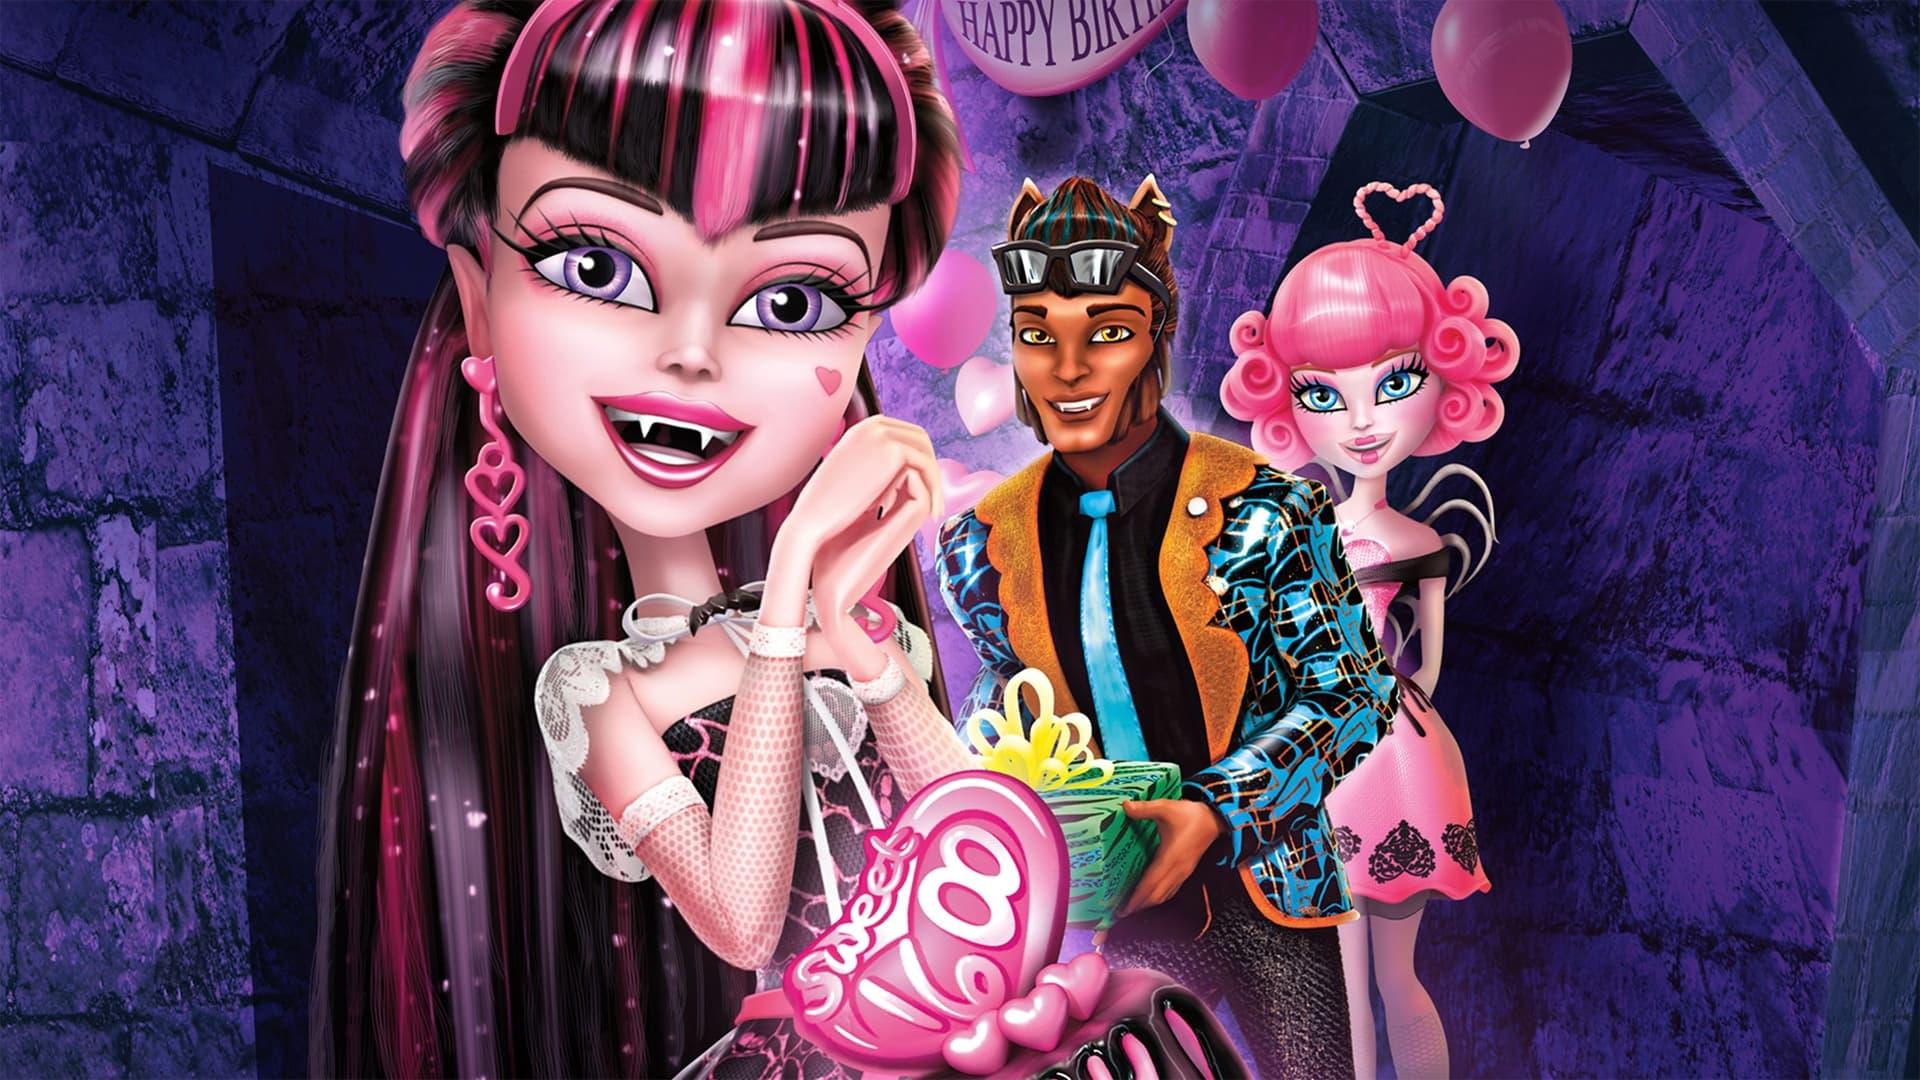 Monster High: Why Do Ghouls Fall in Love? backdrop